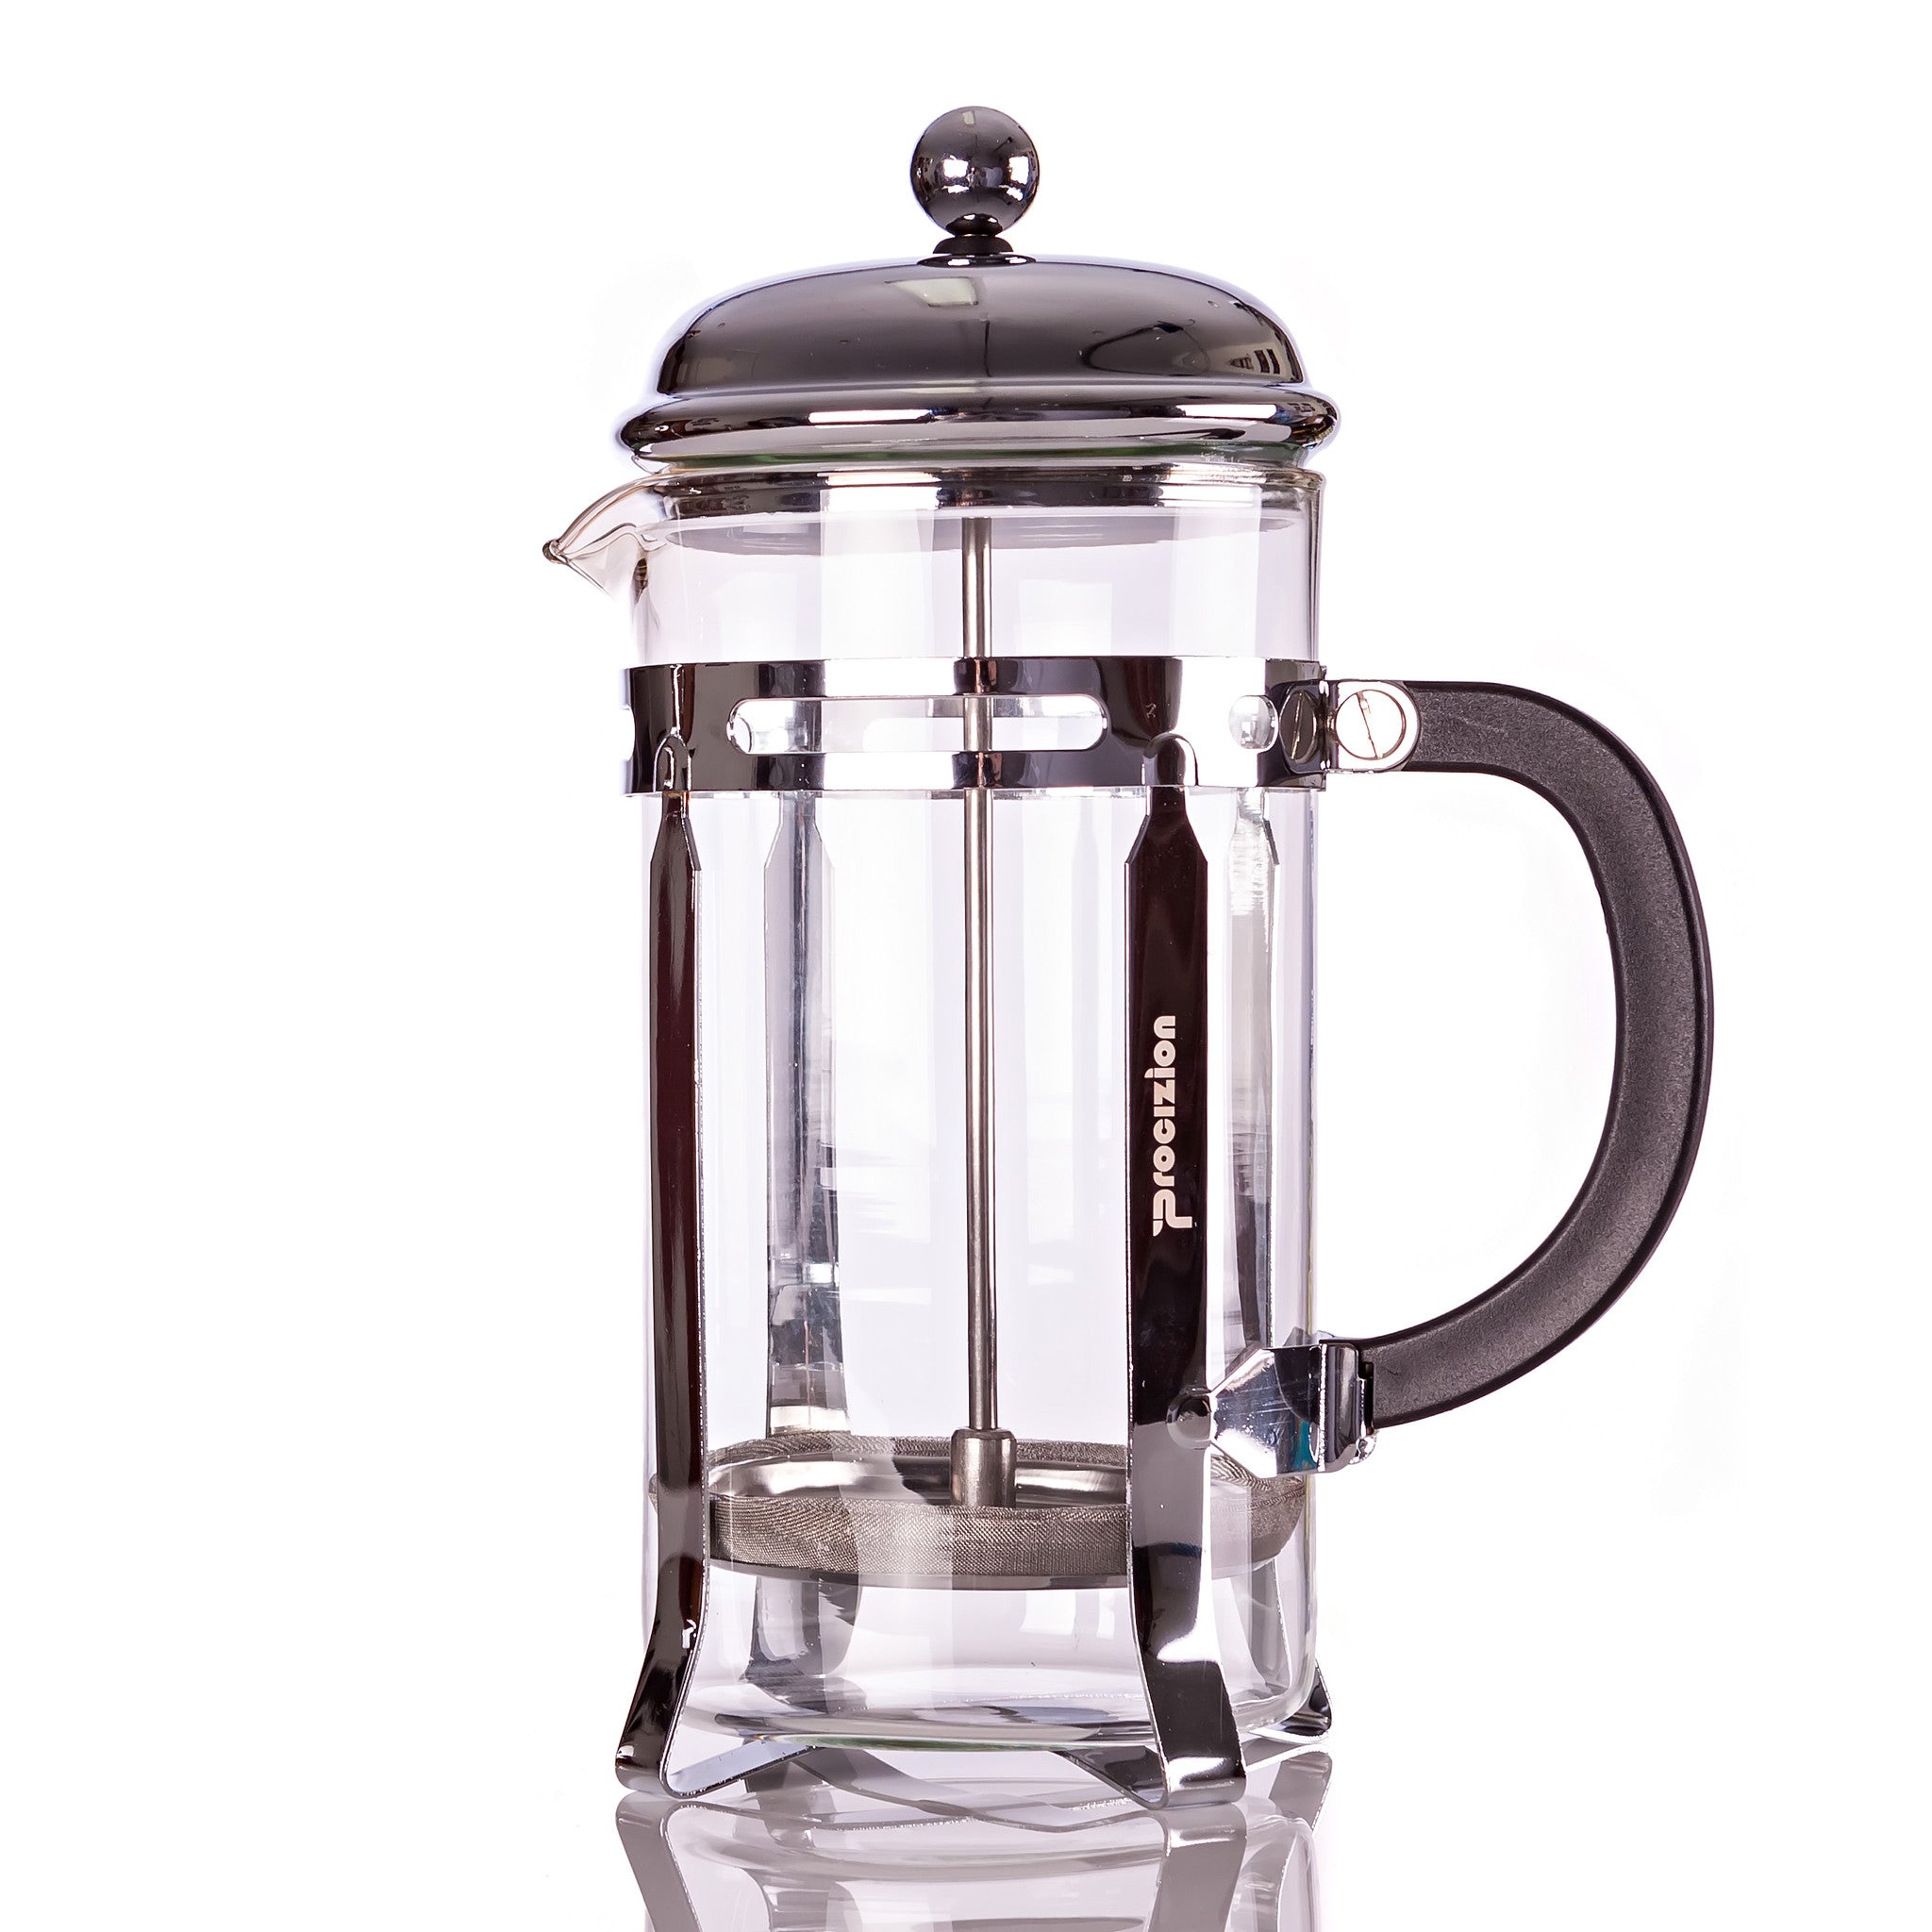 ProCo announces release of stainless-steel French press coffee maker